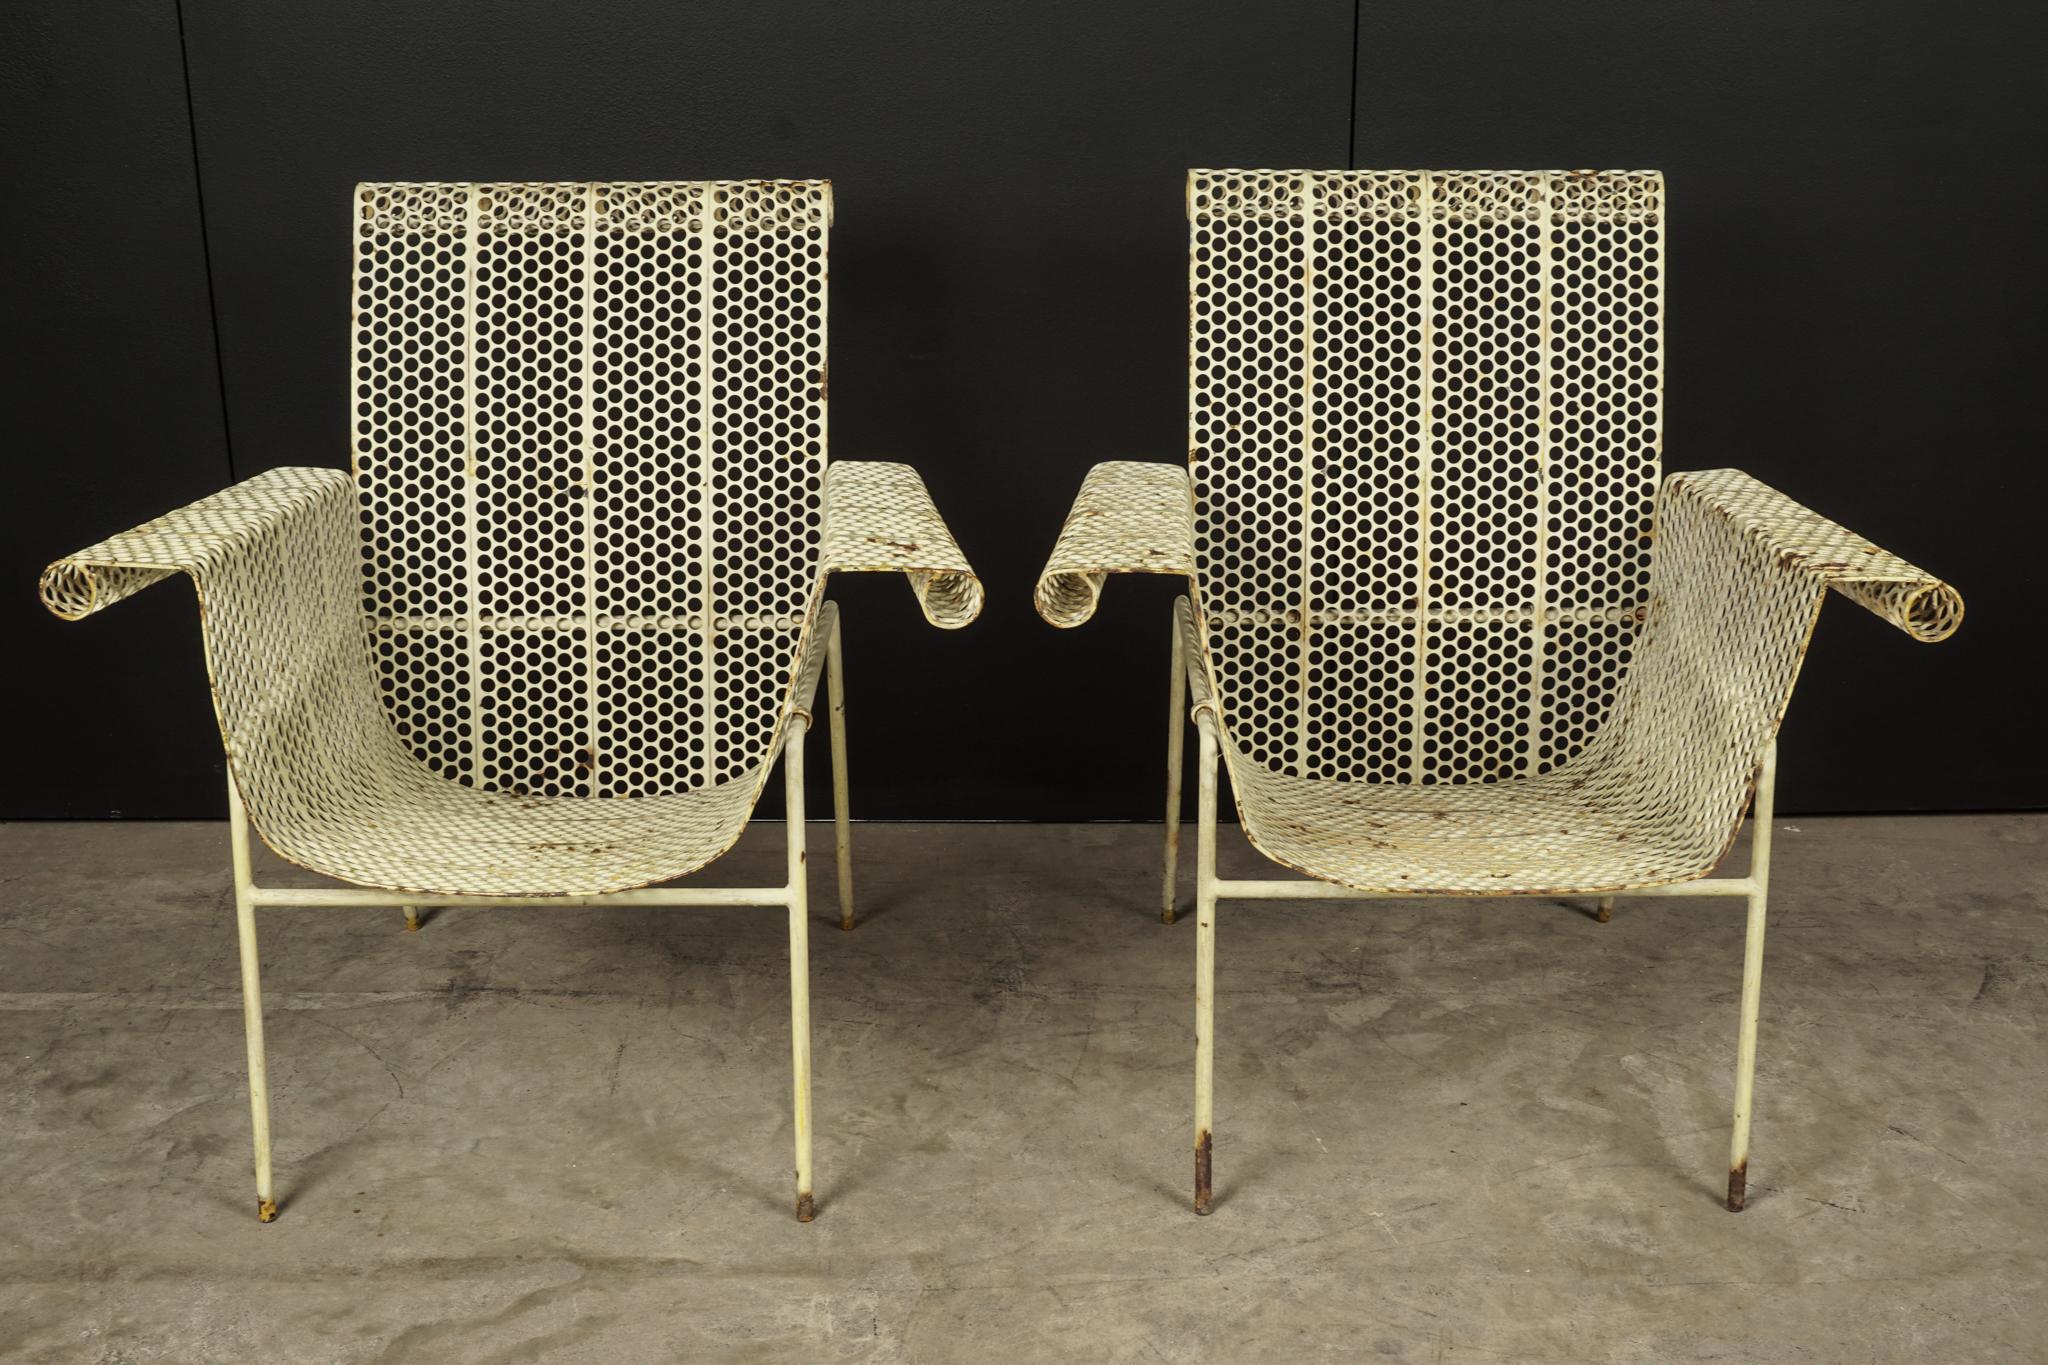 Rare pair of lounge chairs designed by Rene Malaval, France, 1940s. Perforated metal construction in original paint.